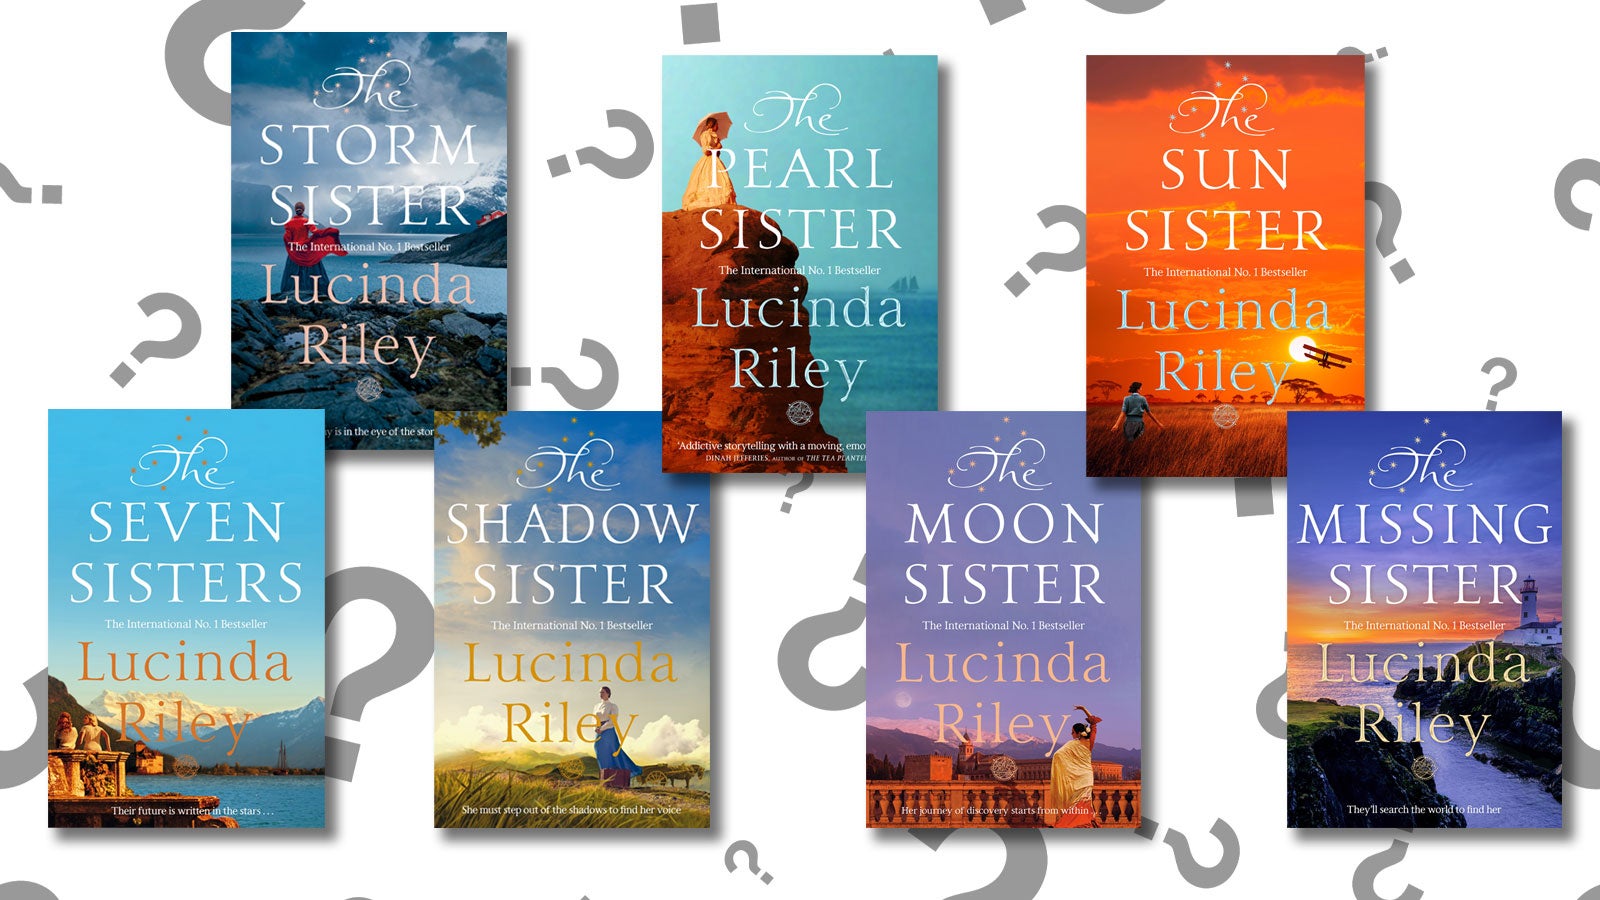 The Seven Sisters series on a background of question marks.